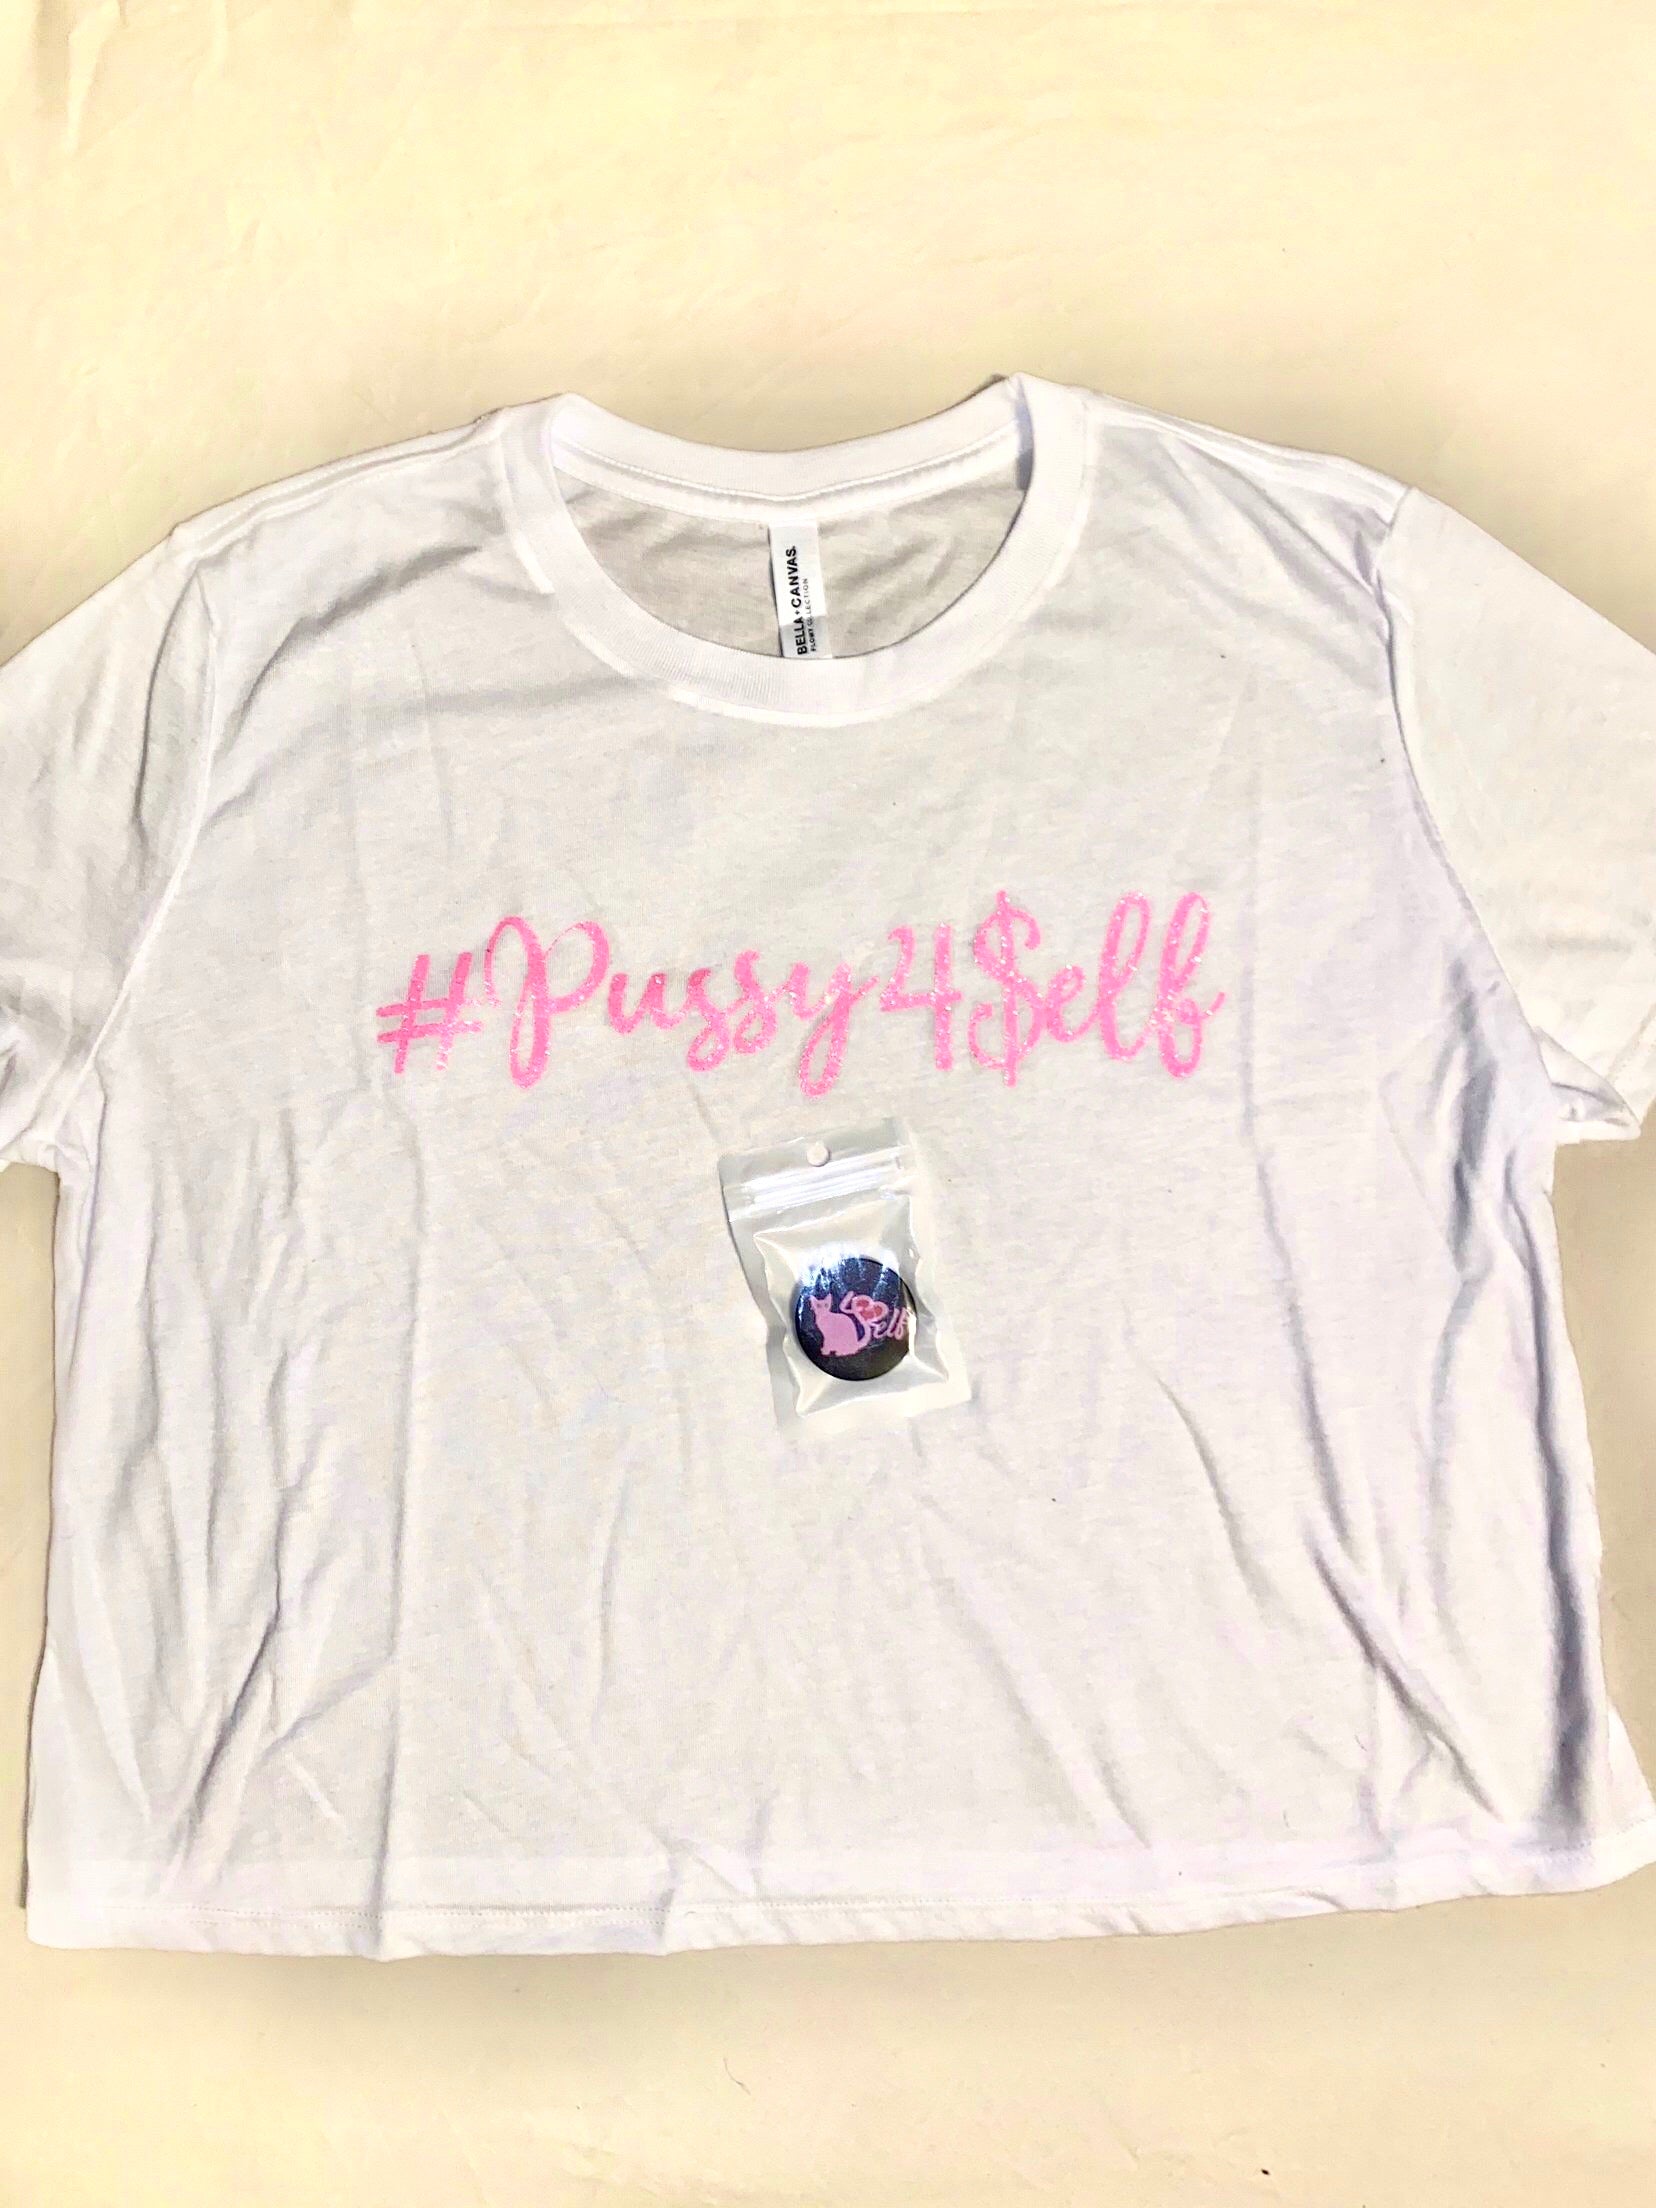  #pussy4self crop top tee white with glitter pink imprint